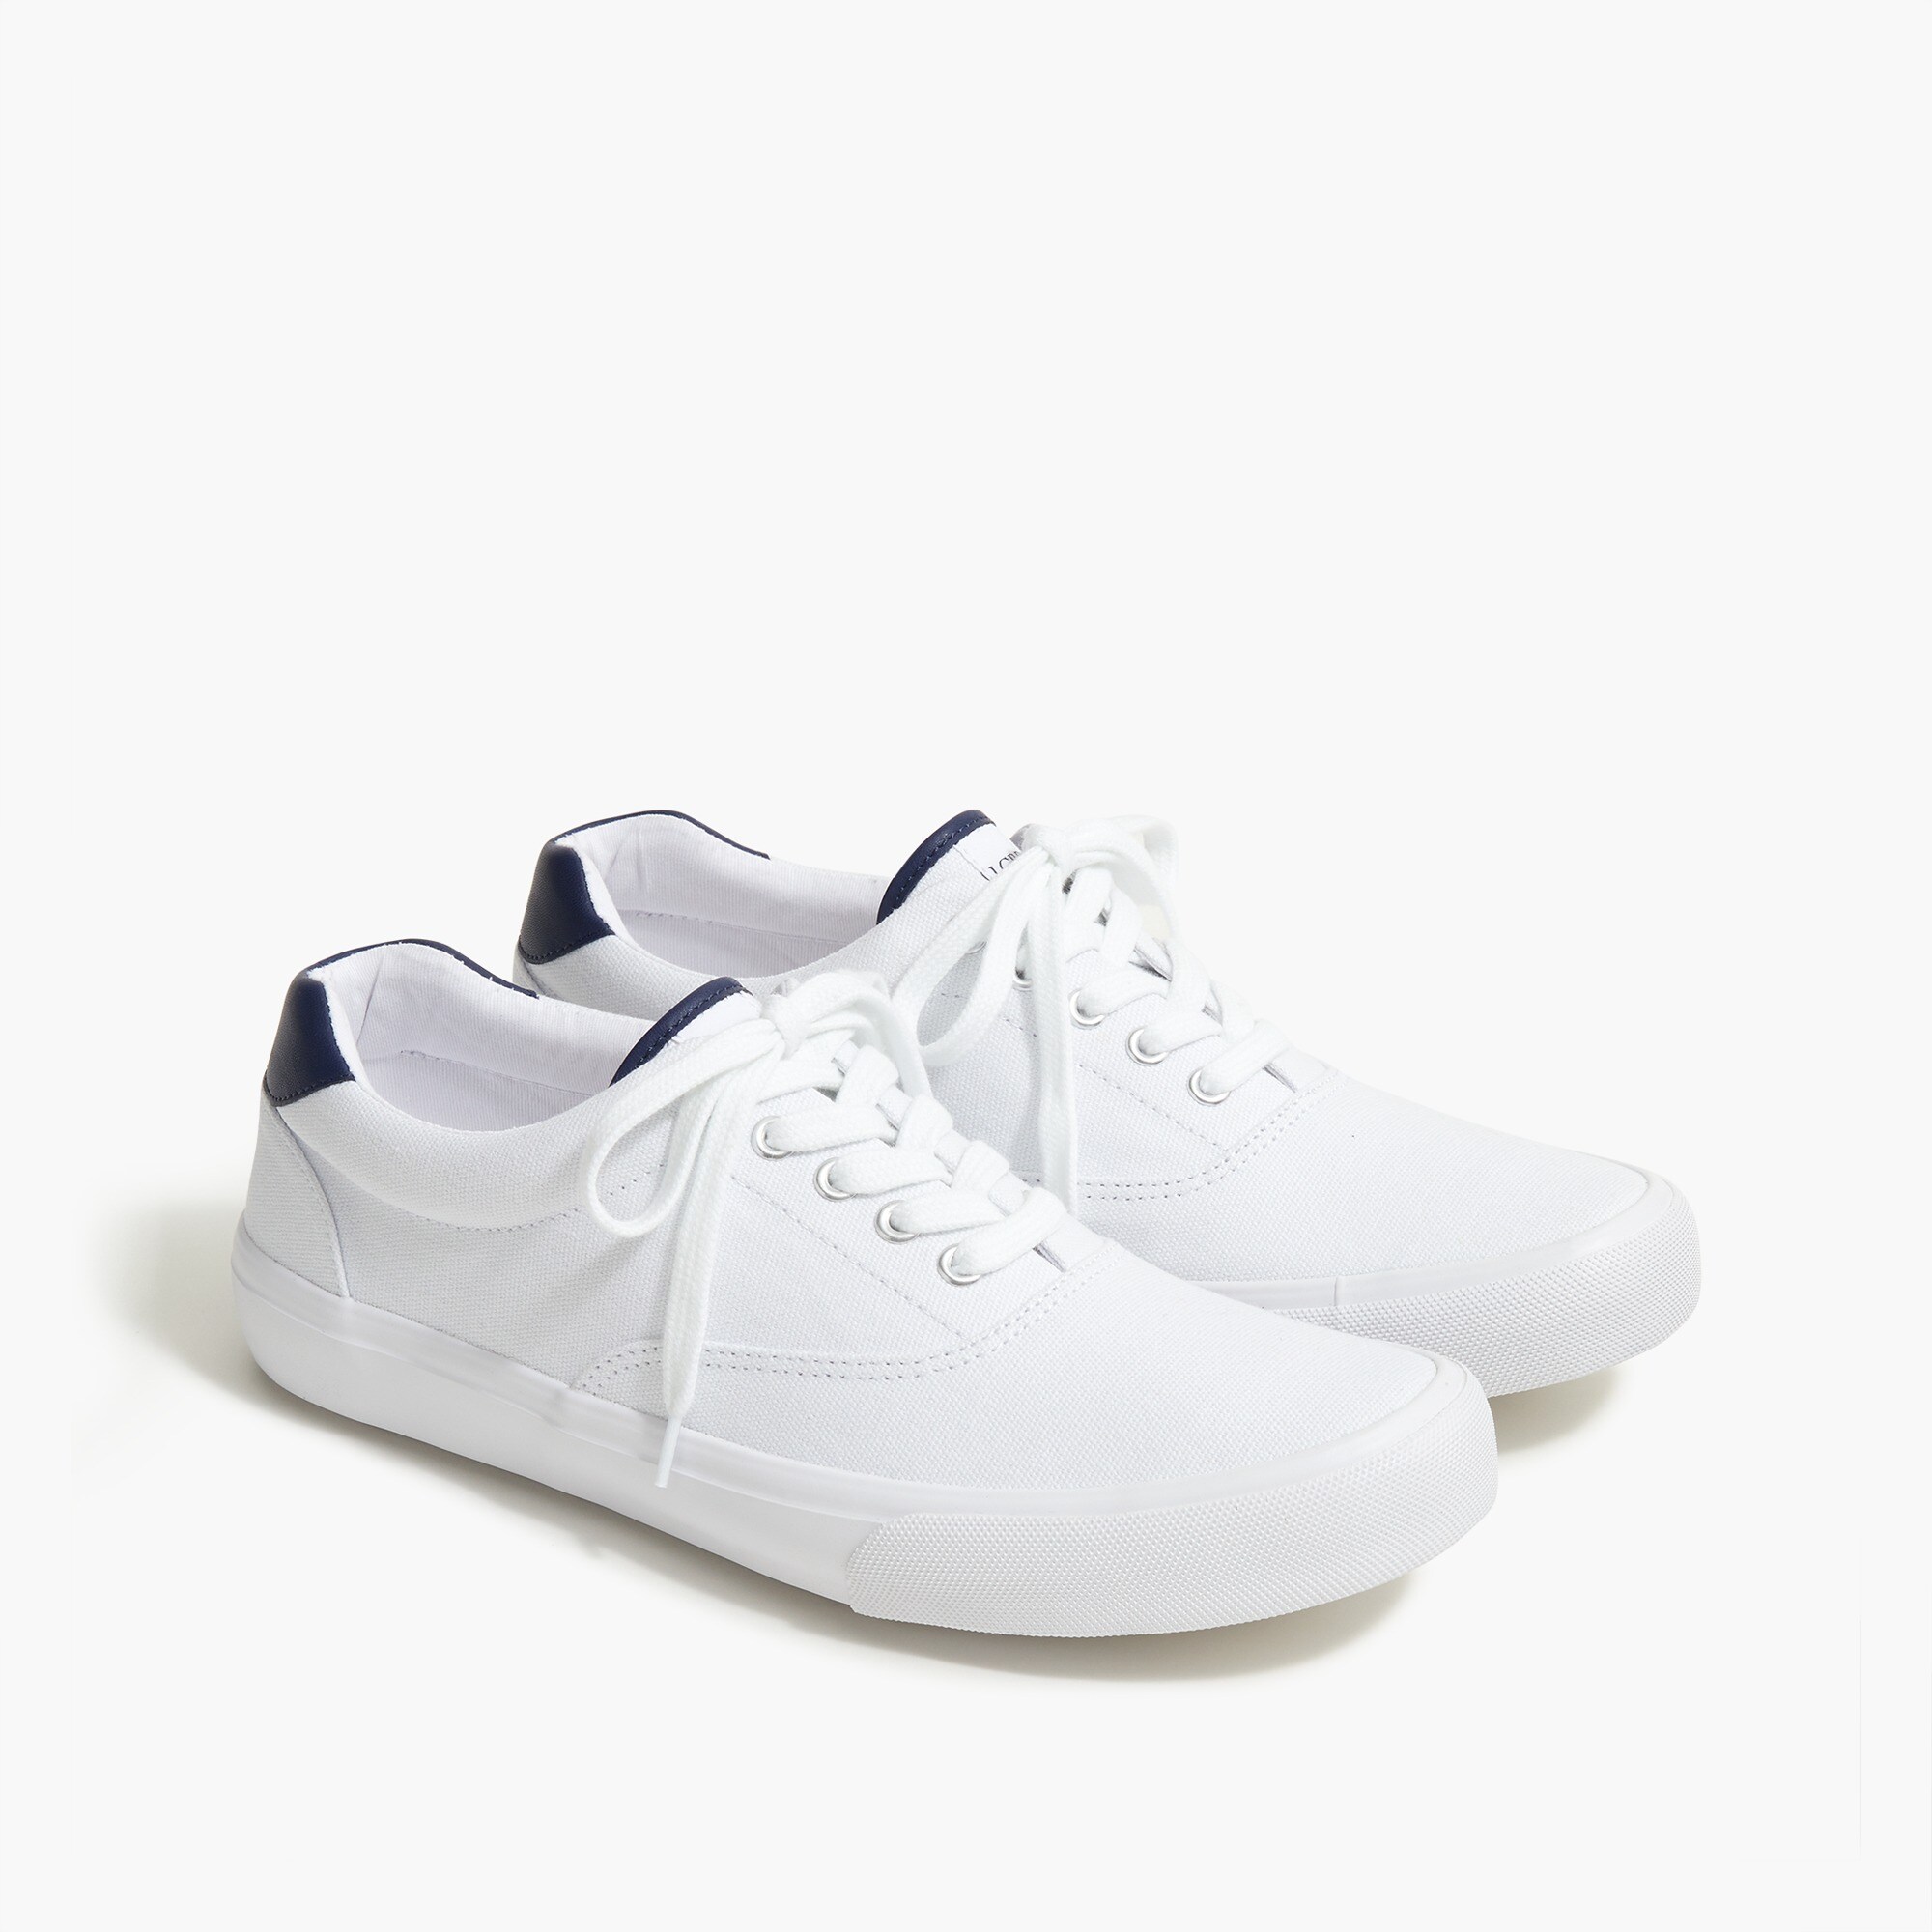  Canvas lace-up sneakers